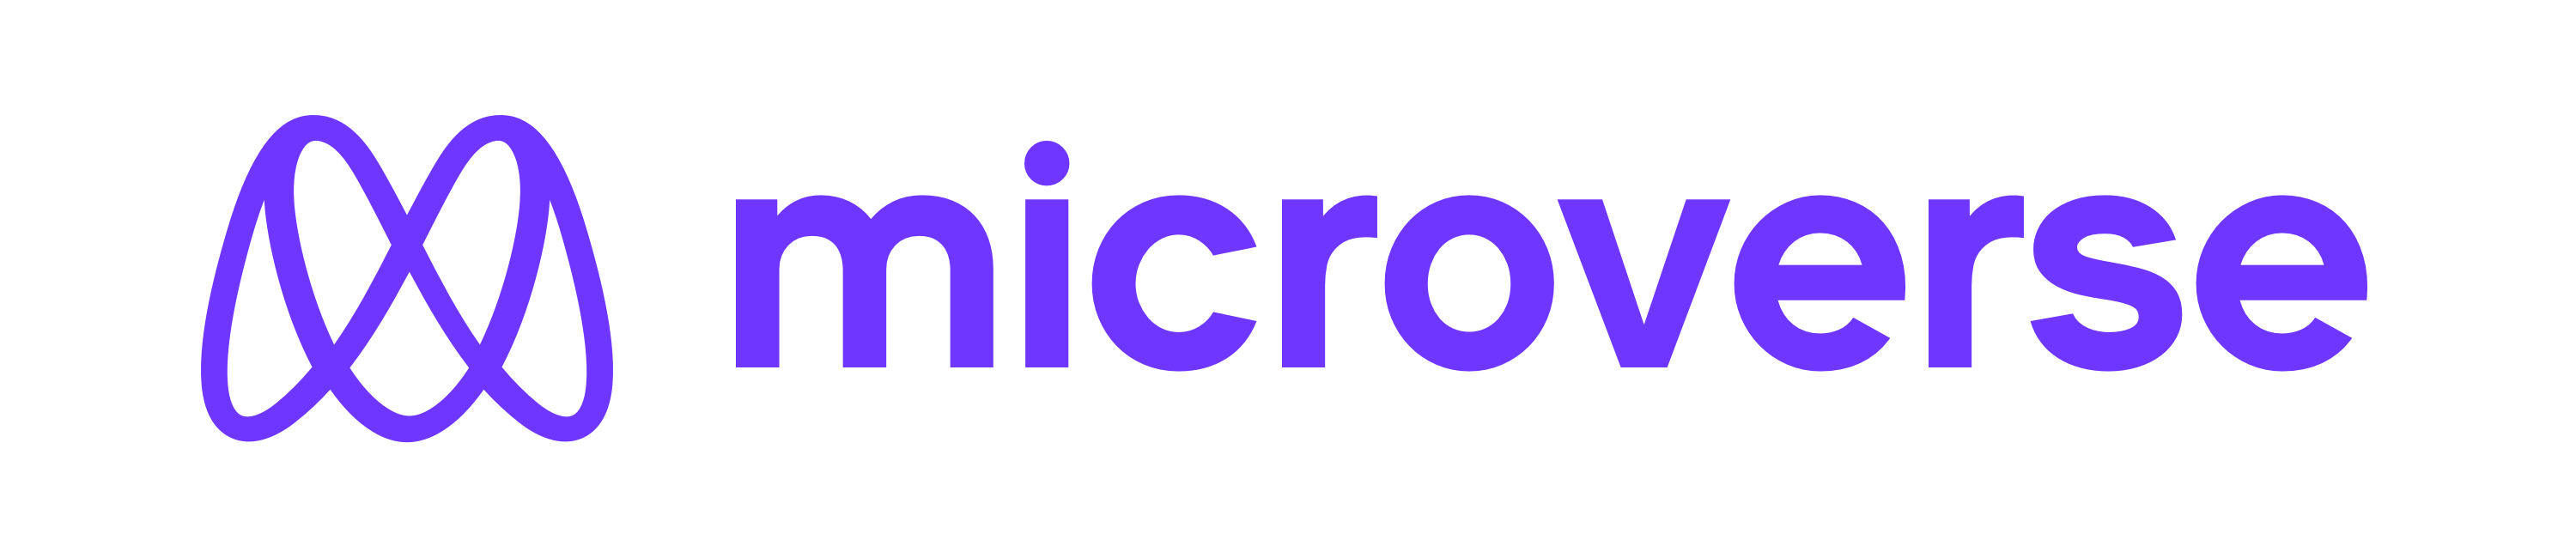 Microverse Raises $3.2 Million in Seed Round Led by General Catalyst